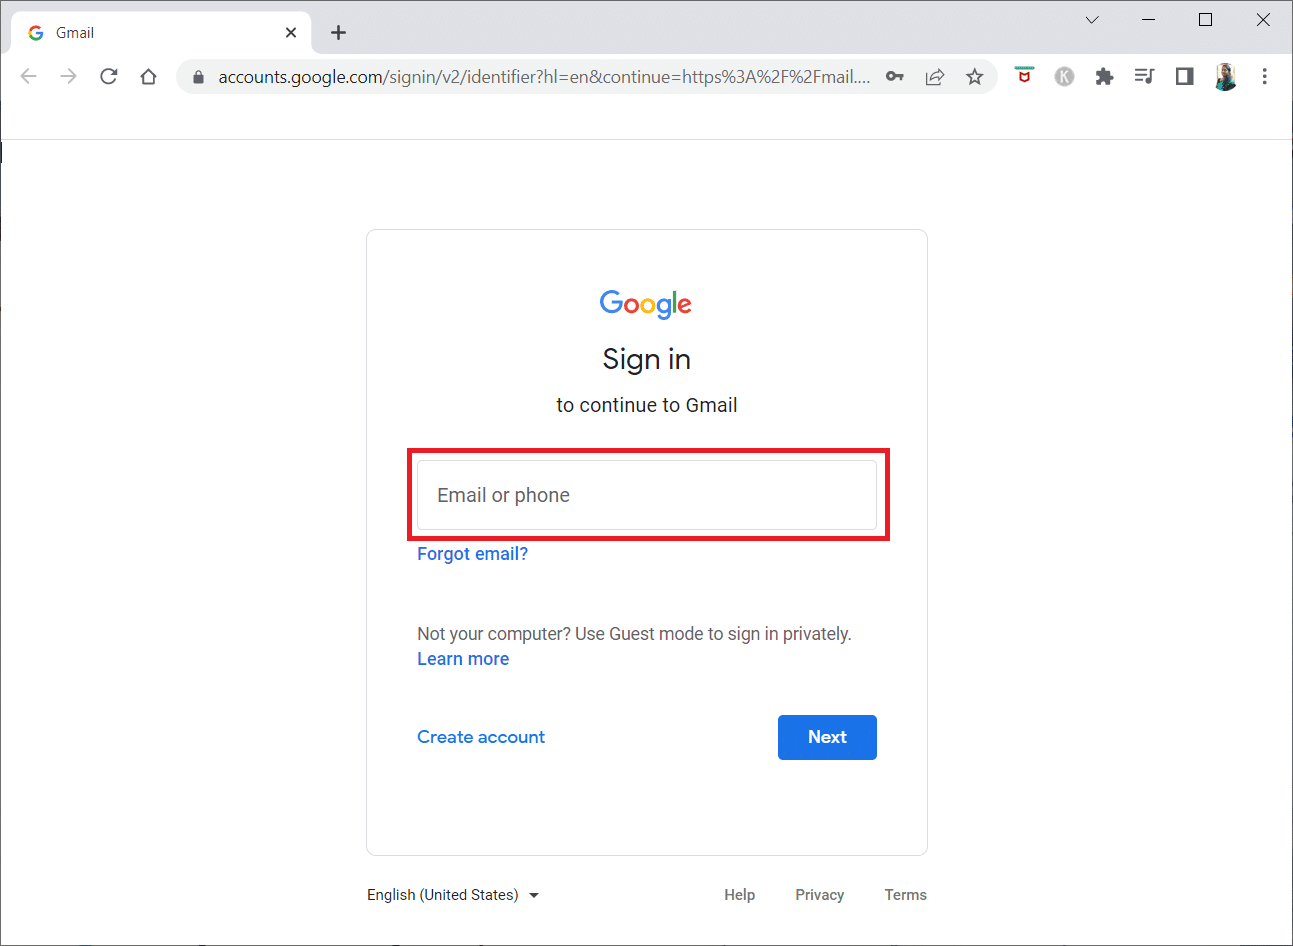 Go to the Gmail website, and log in using your credentials